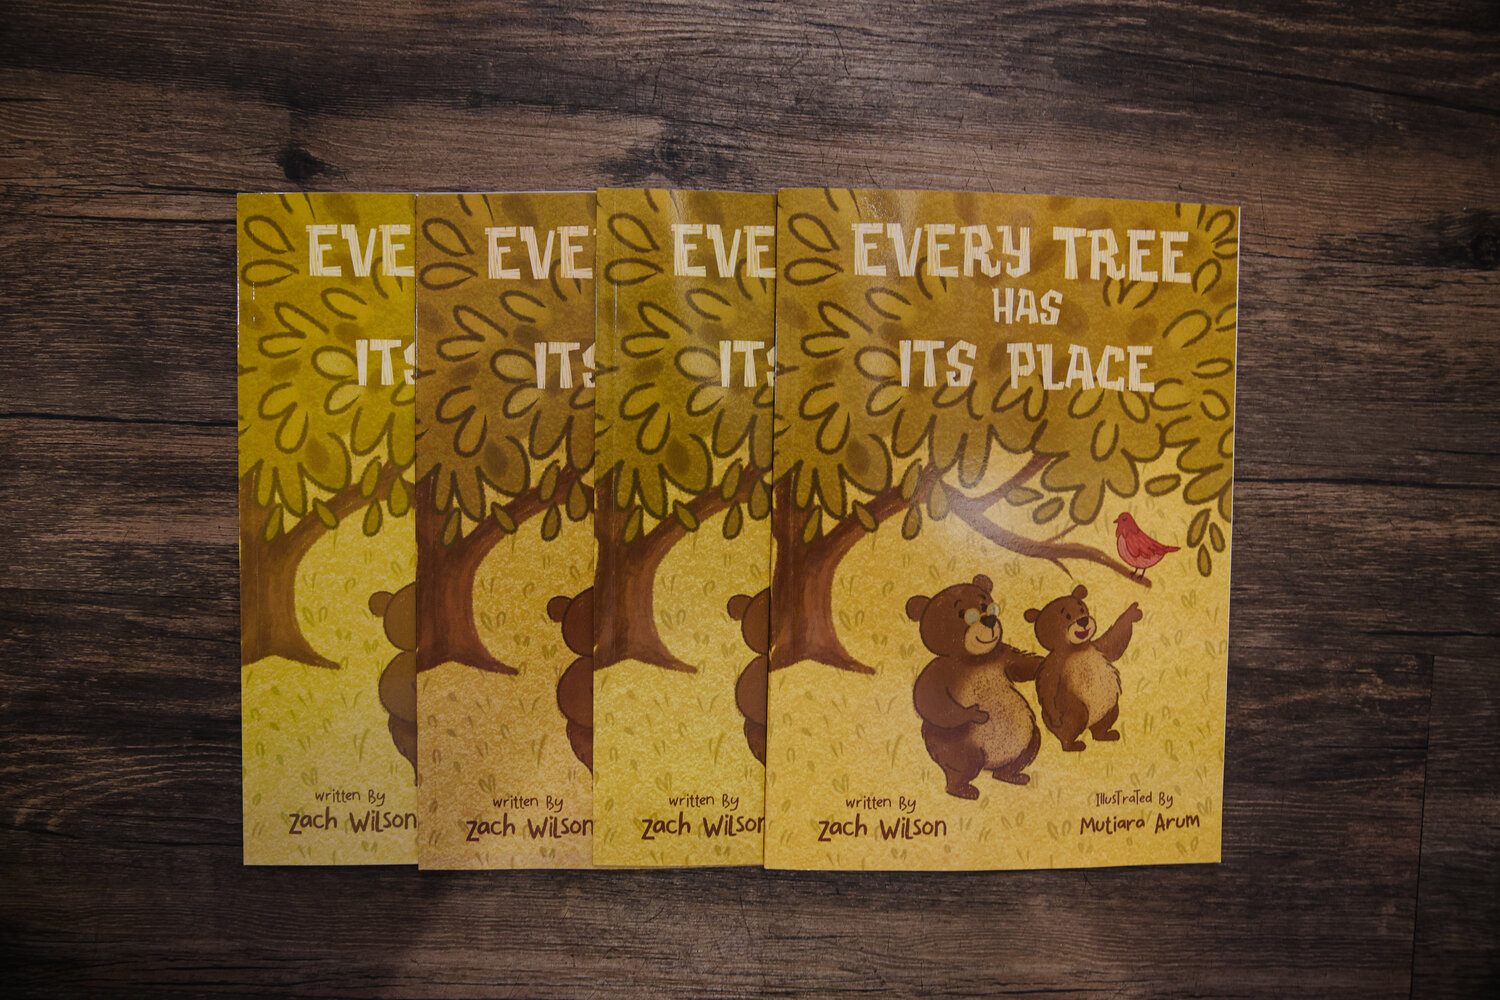 Zach Wilson’s drive for writing was at full speed, giving him the idea to write his first book called “Every Tree has its Place.” This book shares the story of Paw Paw Bear and Bridger Bear going on a journey through The Great Wood. The story is guided by the message of Ephesians 2:10, giving Paw Paw Bear the opportunity to share the meaning of Bridger Bear’s individual gifts and talents.